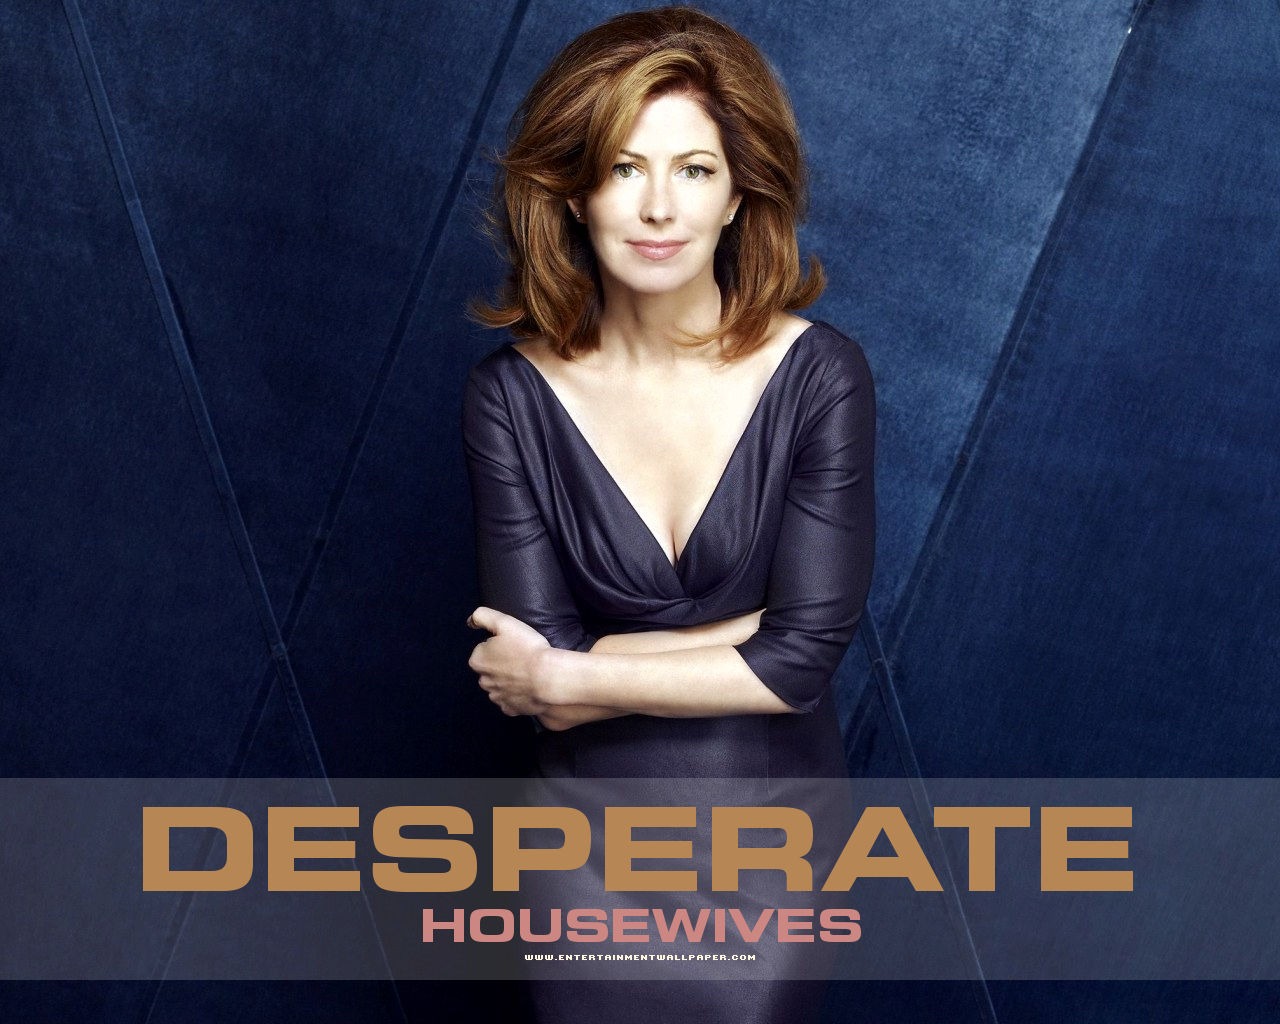 Desperate Housewives wallpaper #29 - 1280x1024